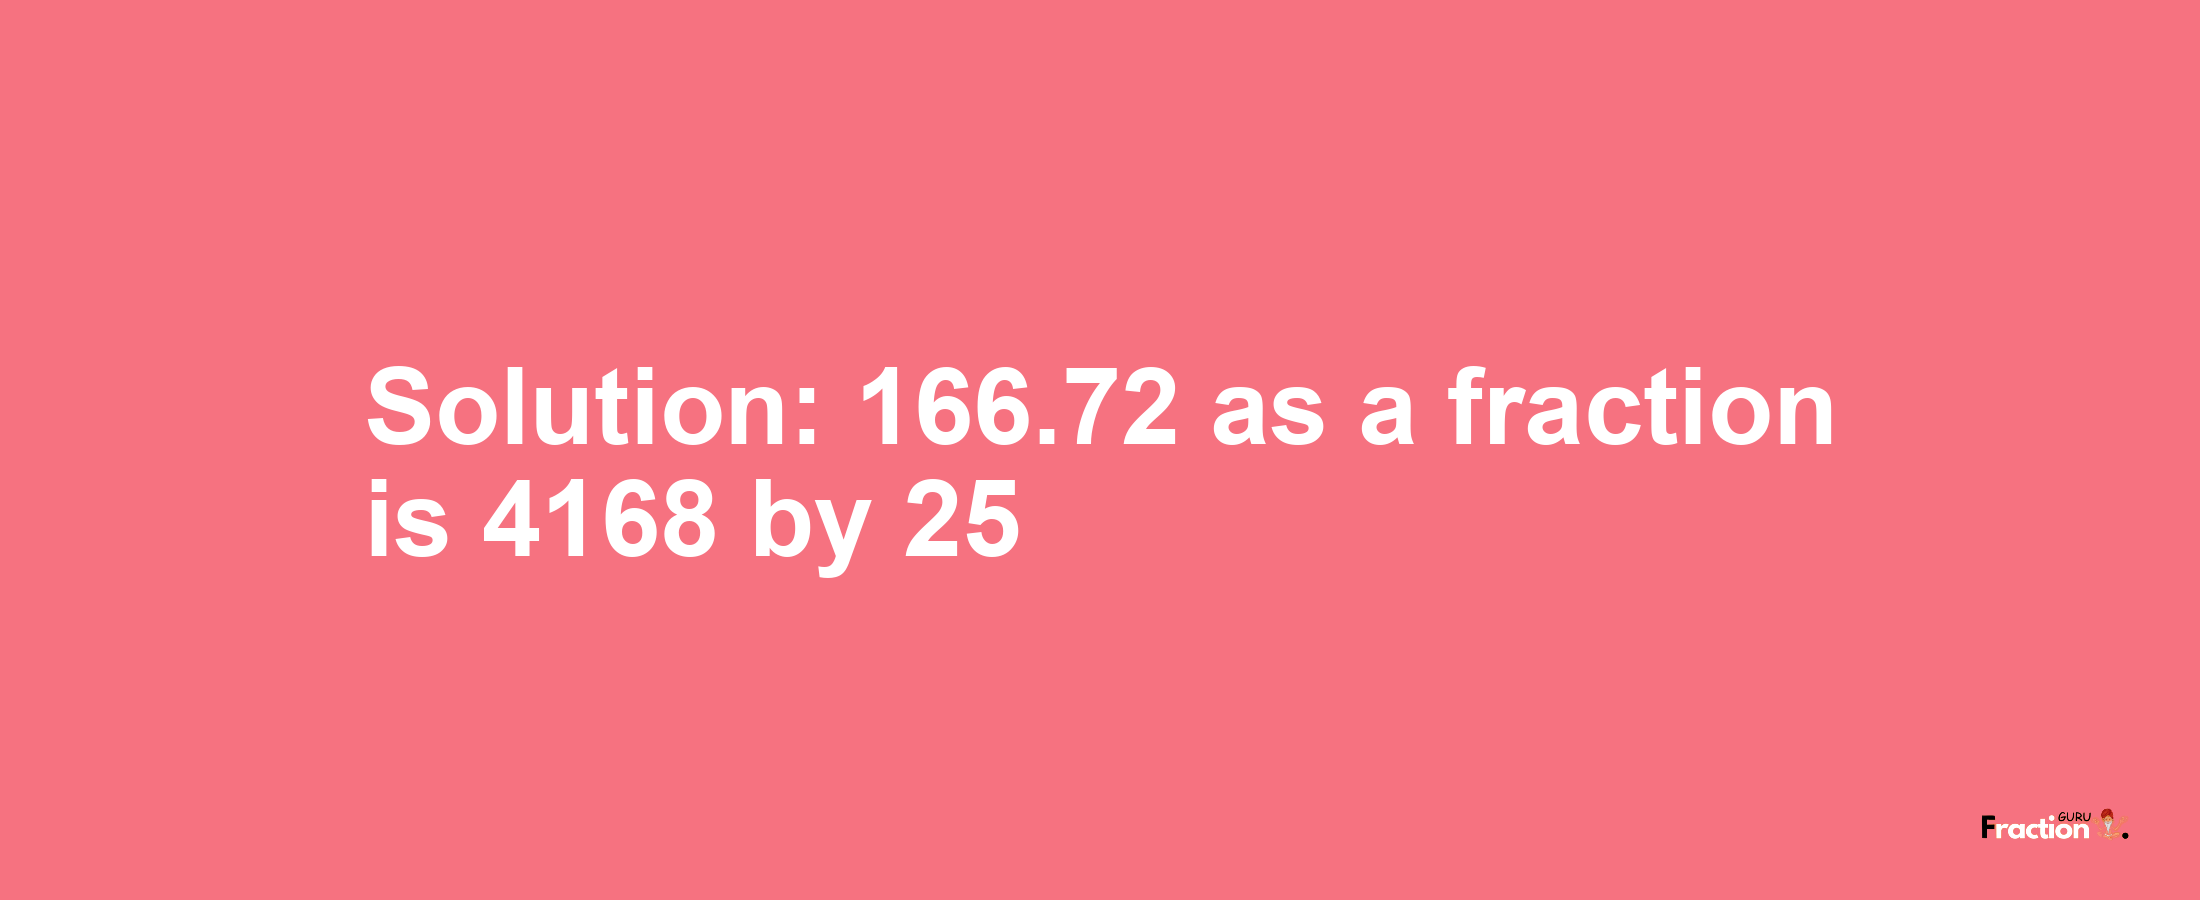 Solution:166.72 as a fraction is 4168/25